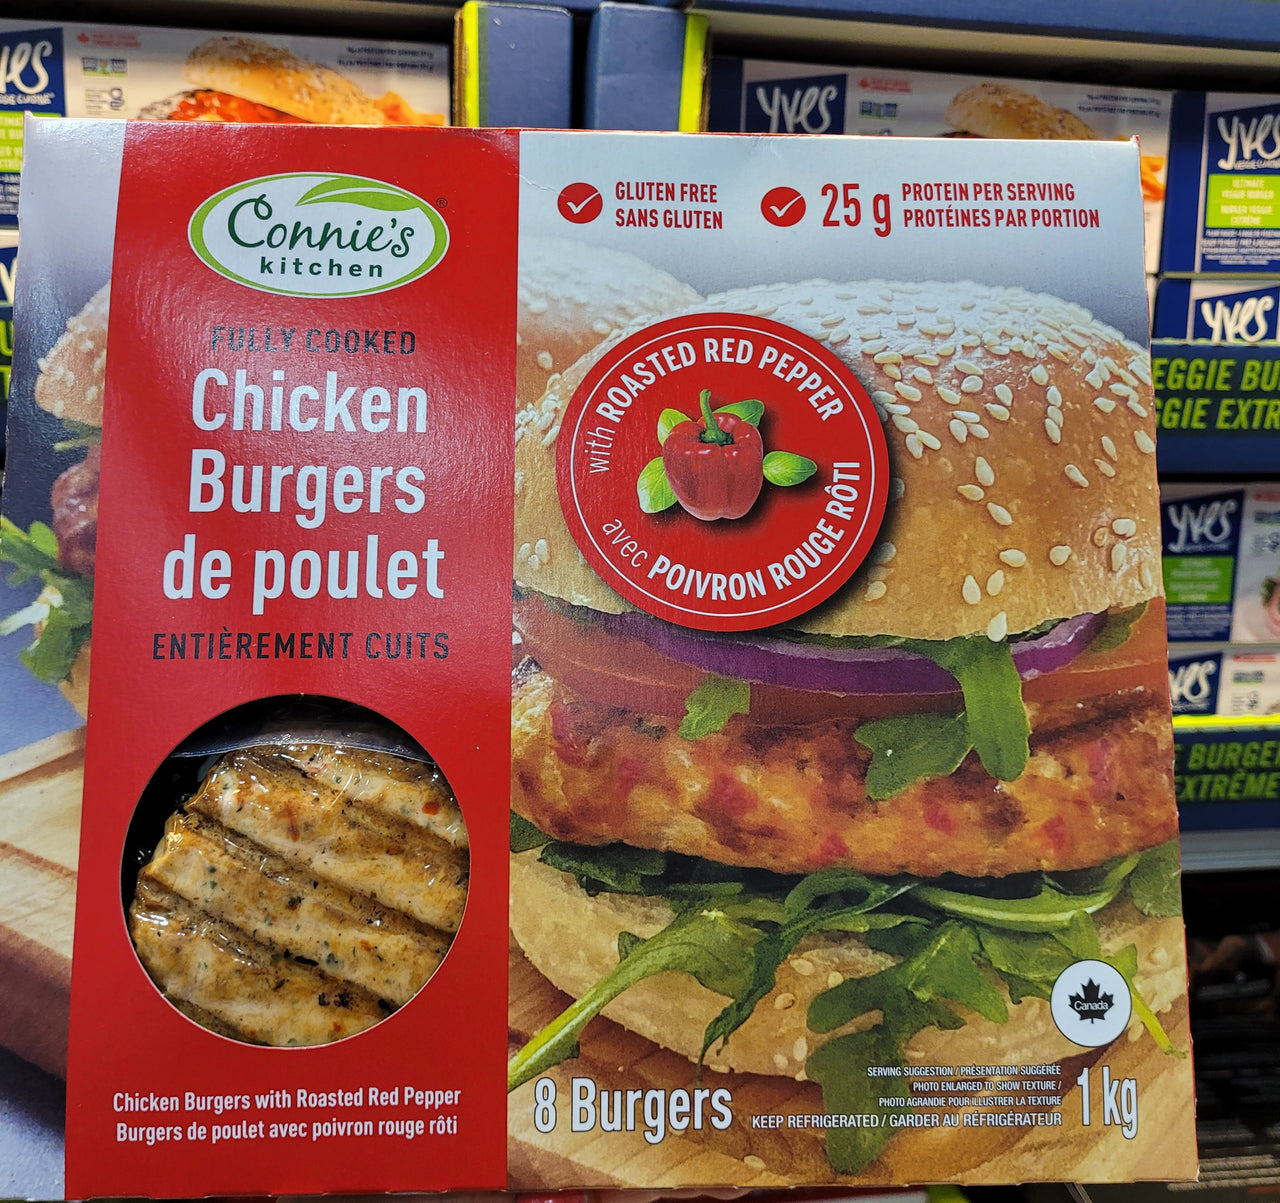 Image of Connie's Kitchen Chicken Burgers with roasted red pepper - 1 x 1 Kilos